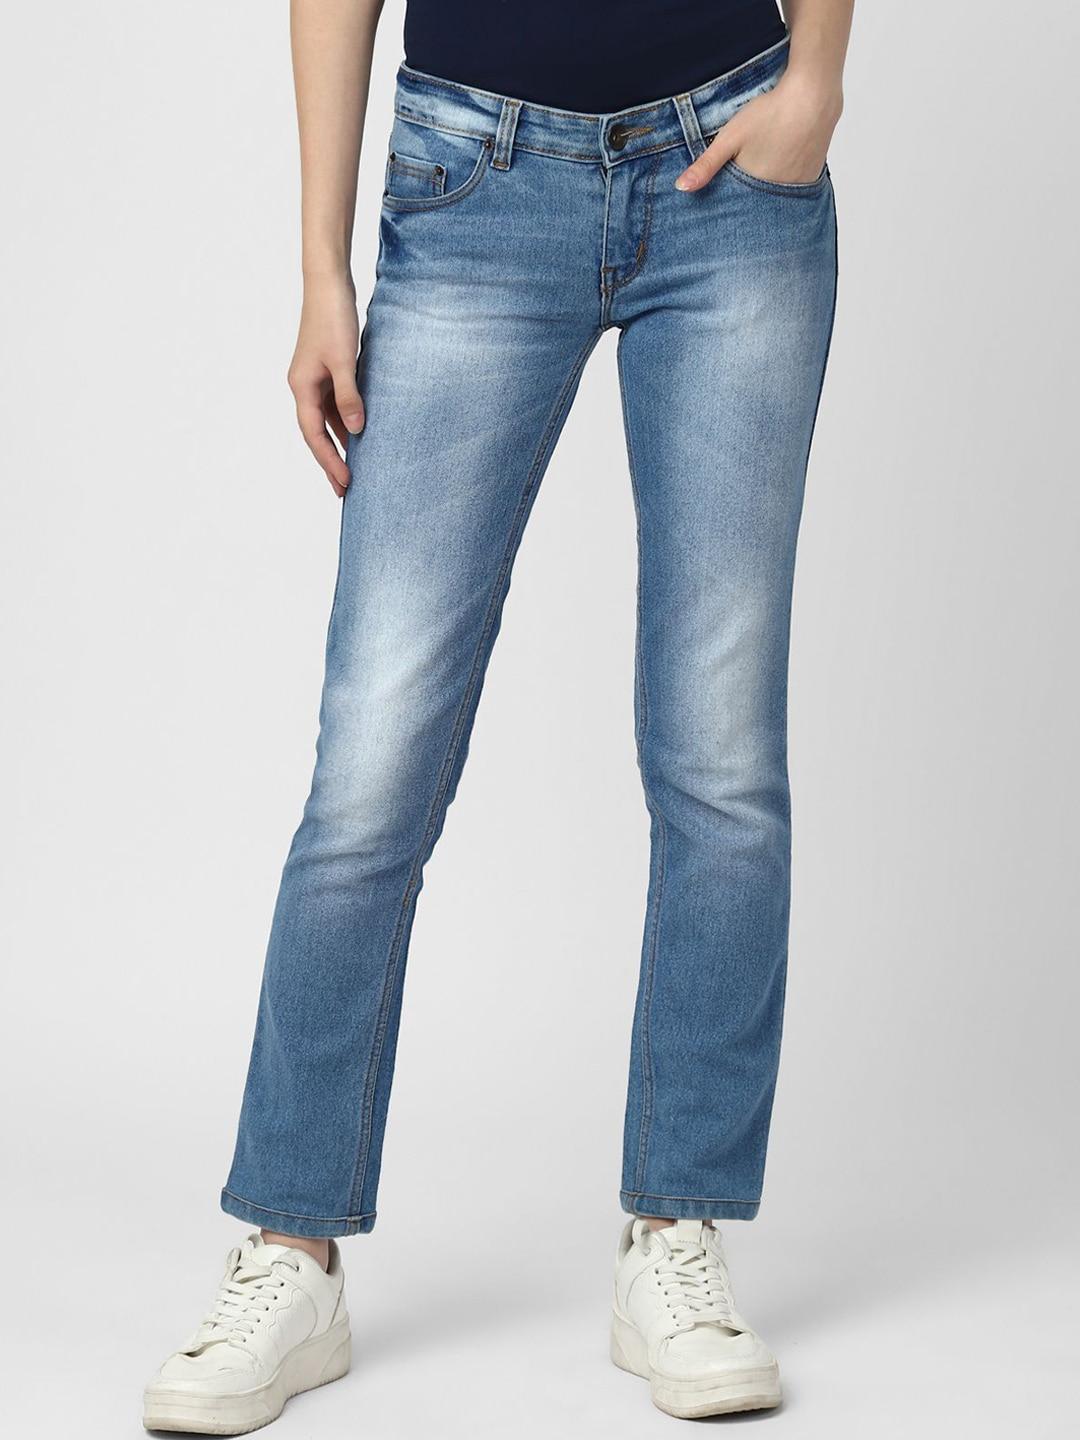 urbanmark-women-mid-rise-clean-look-slim-fit-heavy-fade-stretchable-jeans